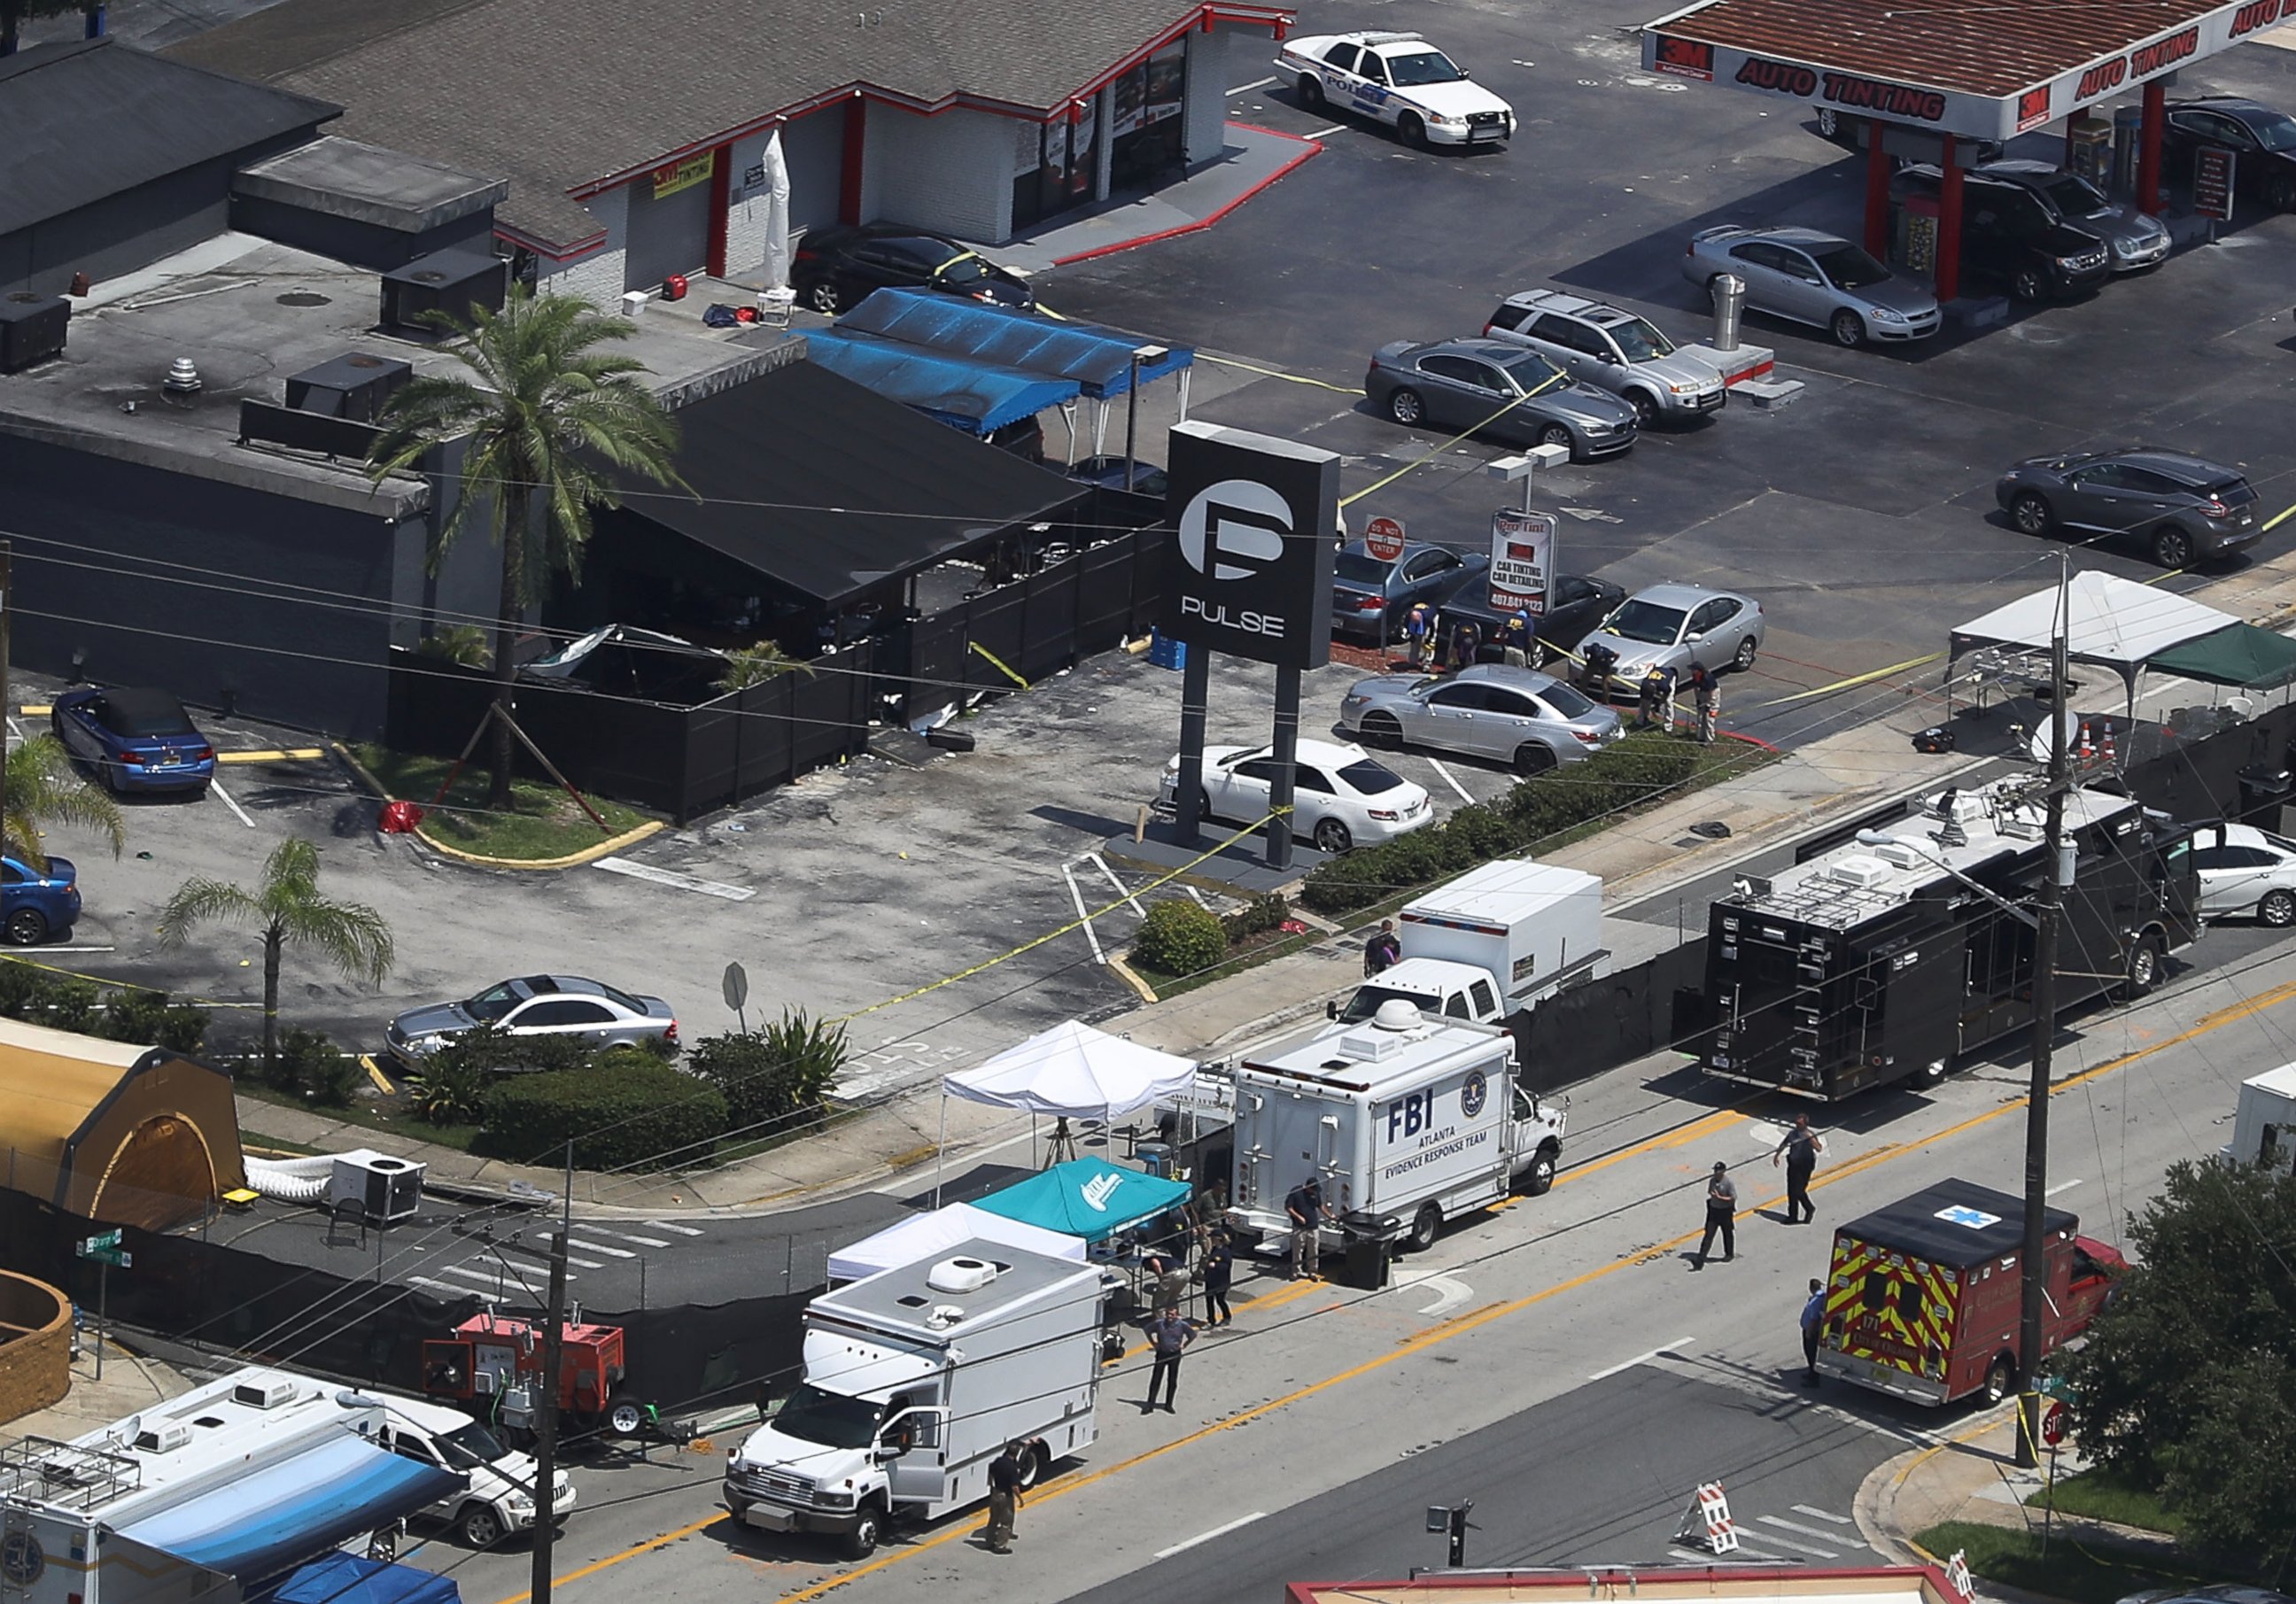 PHOTO: Law enforcement officials continue the investigation at the Pulse gay nightclub, June 15, 2016 in Orlando, Florida.